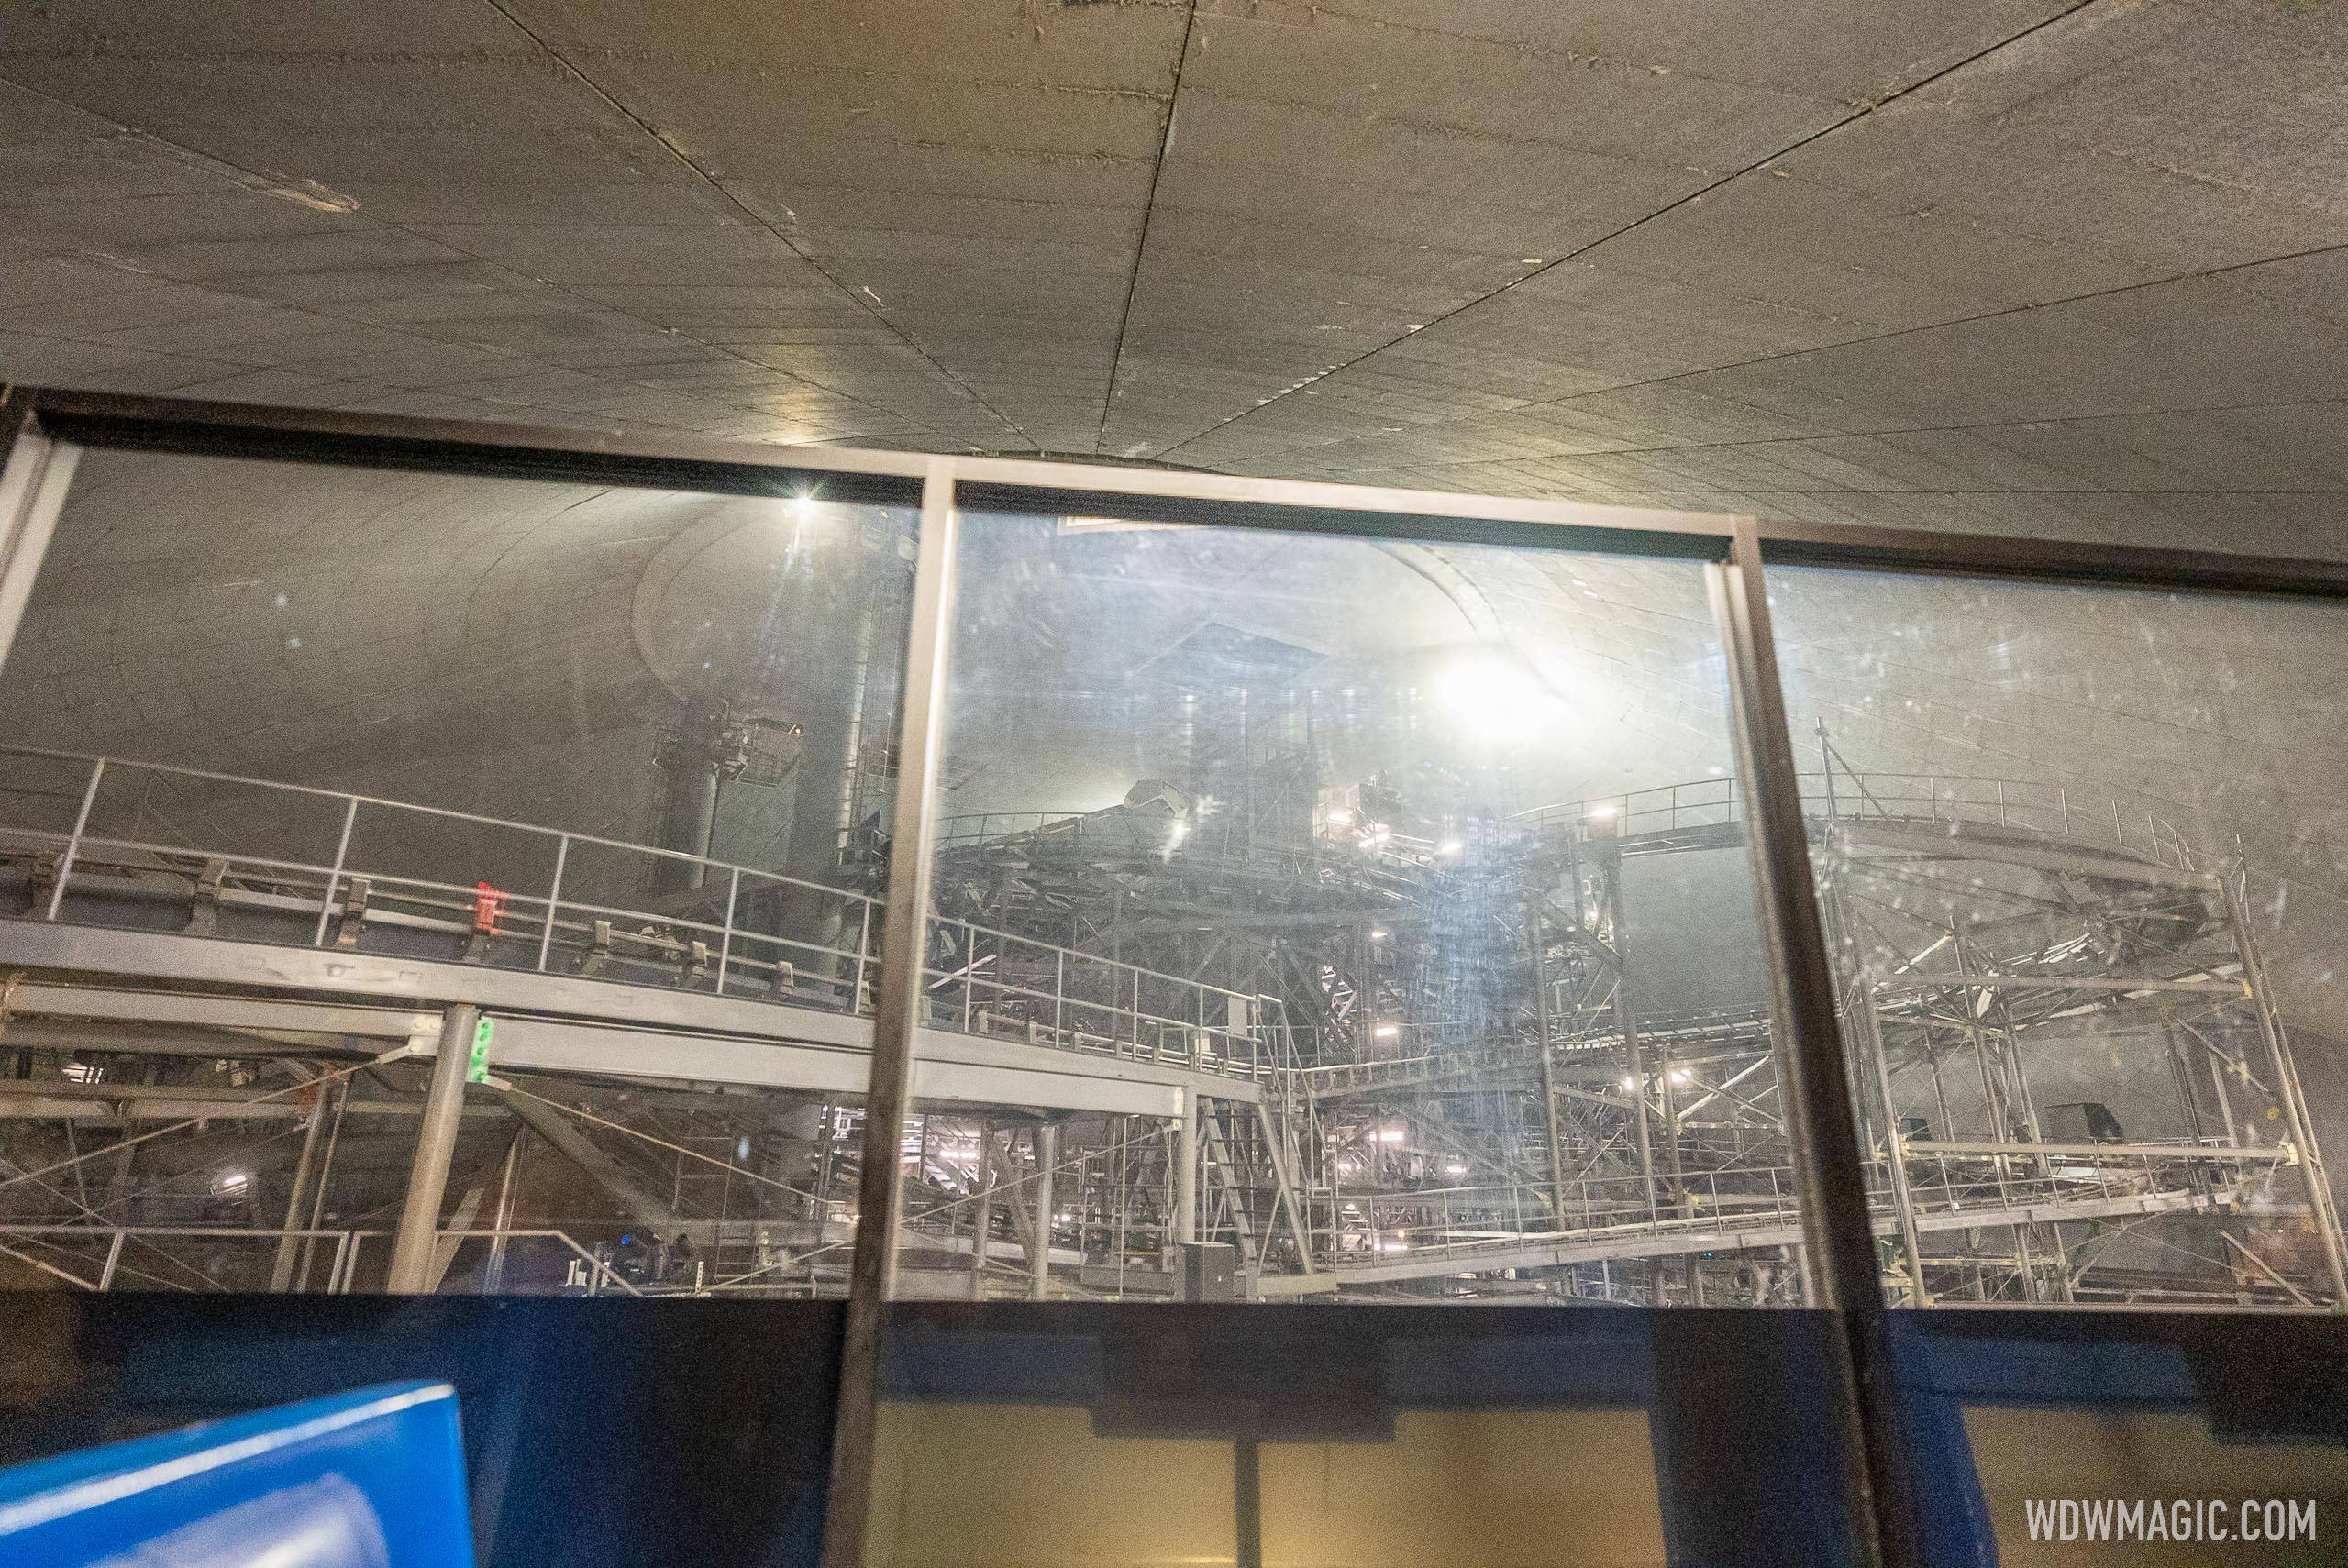 Space Mountain lights on - November 2022